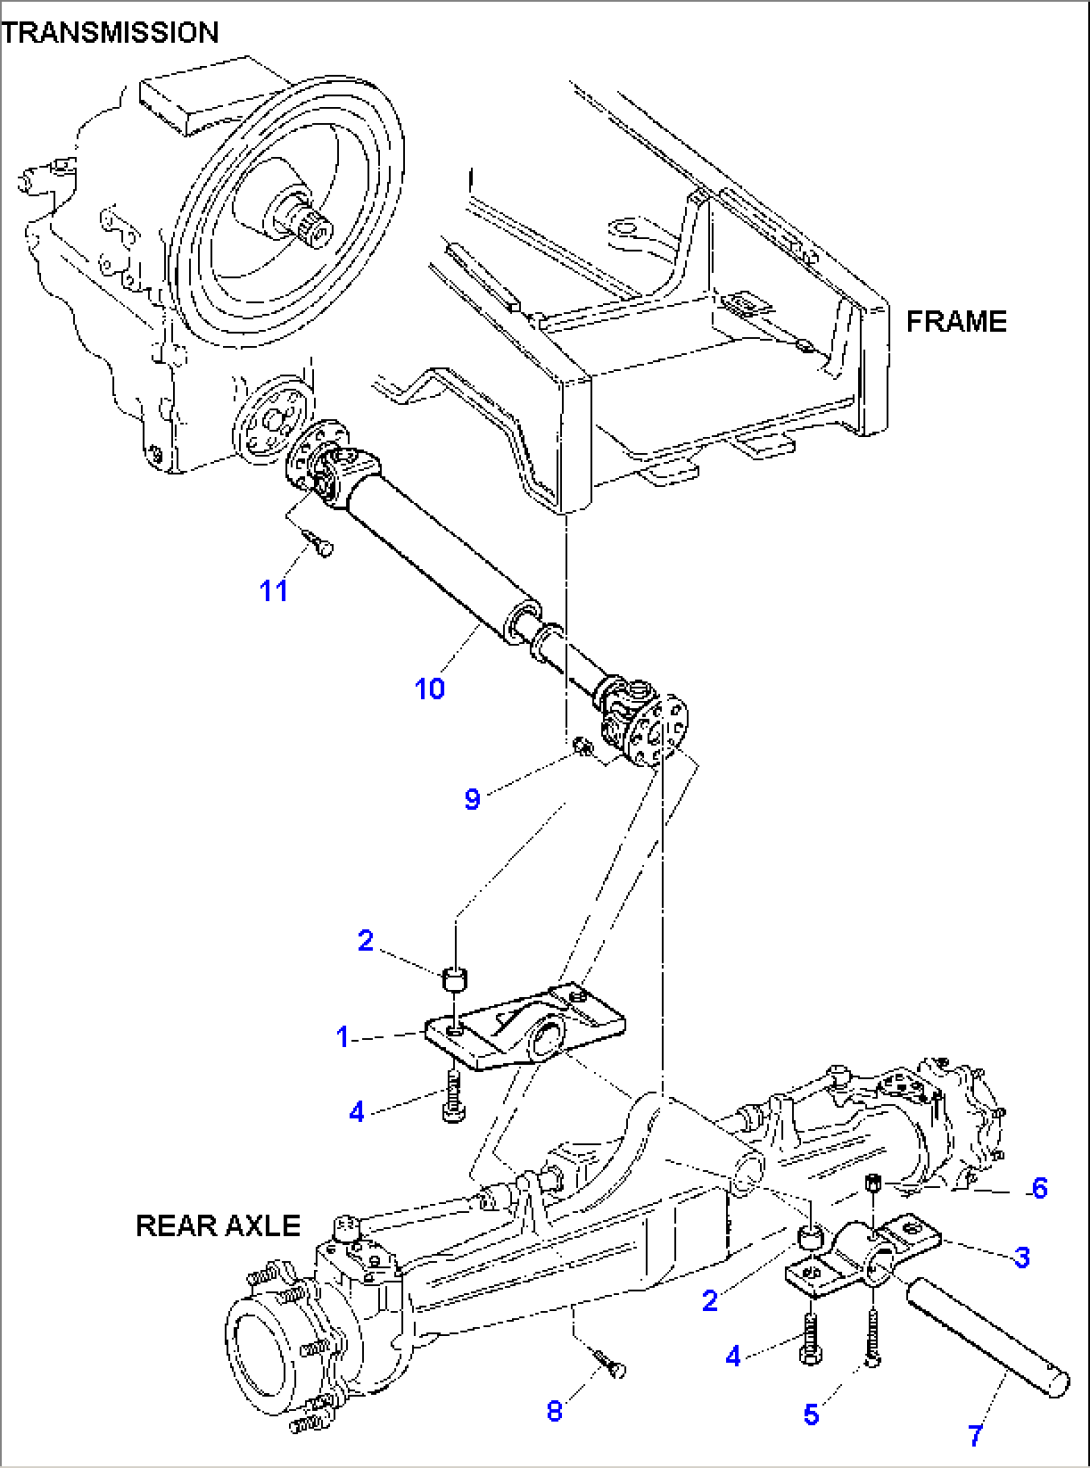 FRONT PROPELLER SHAFT AND FRONT AXLE FIXING